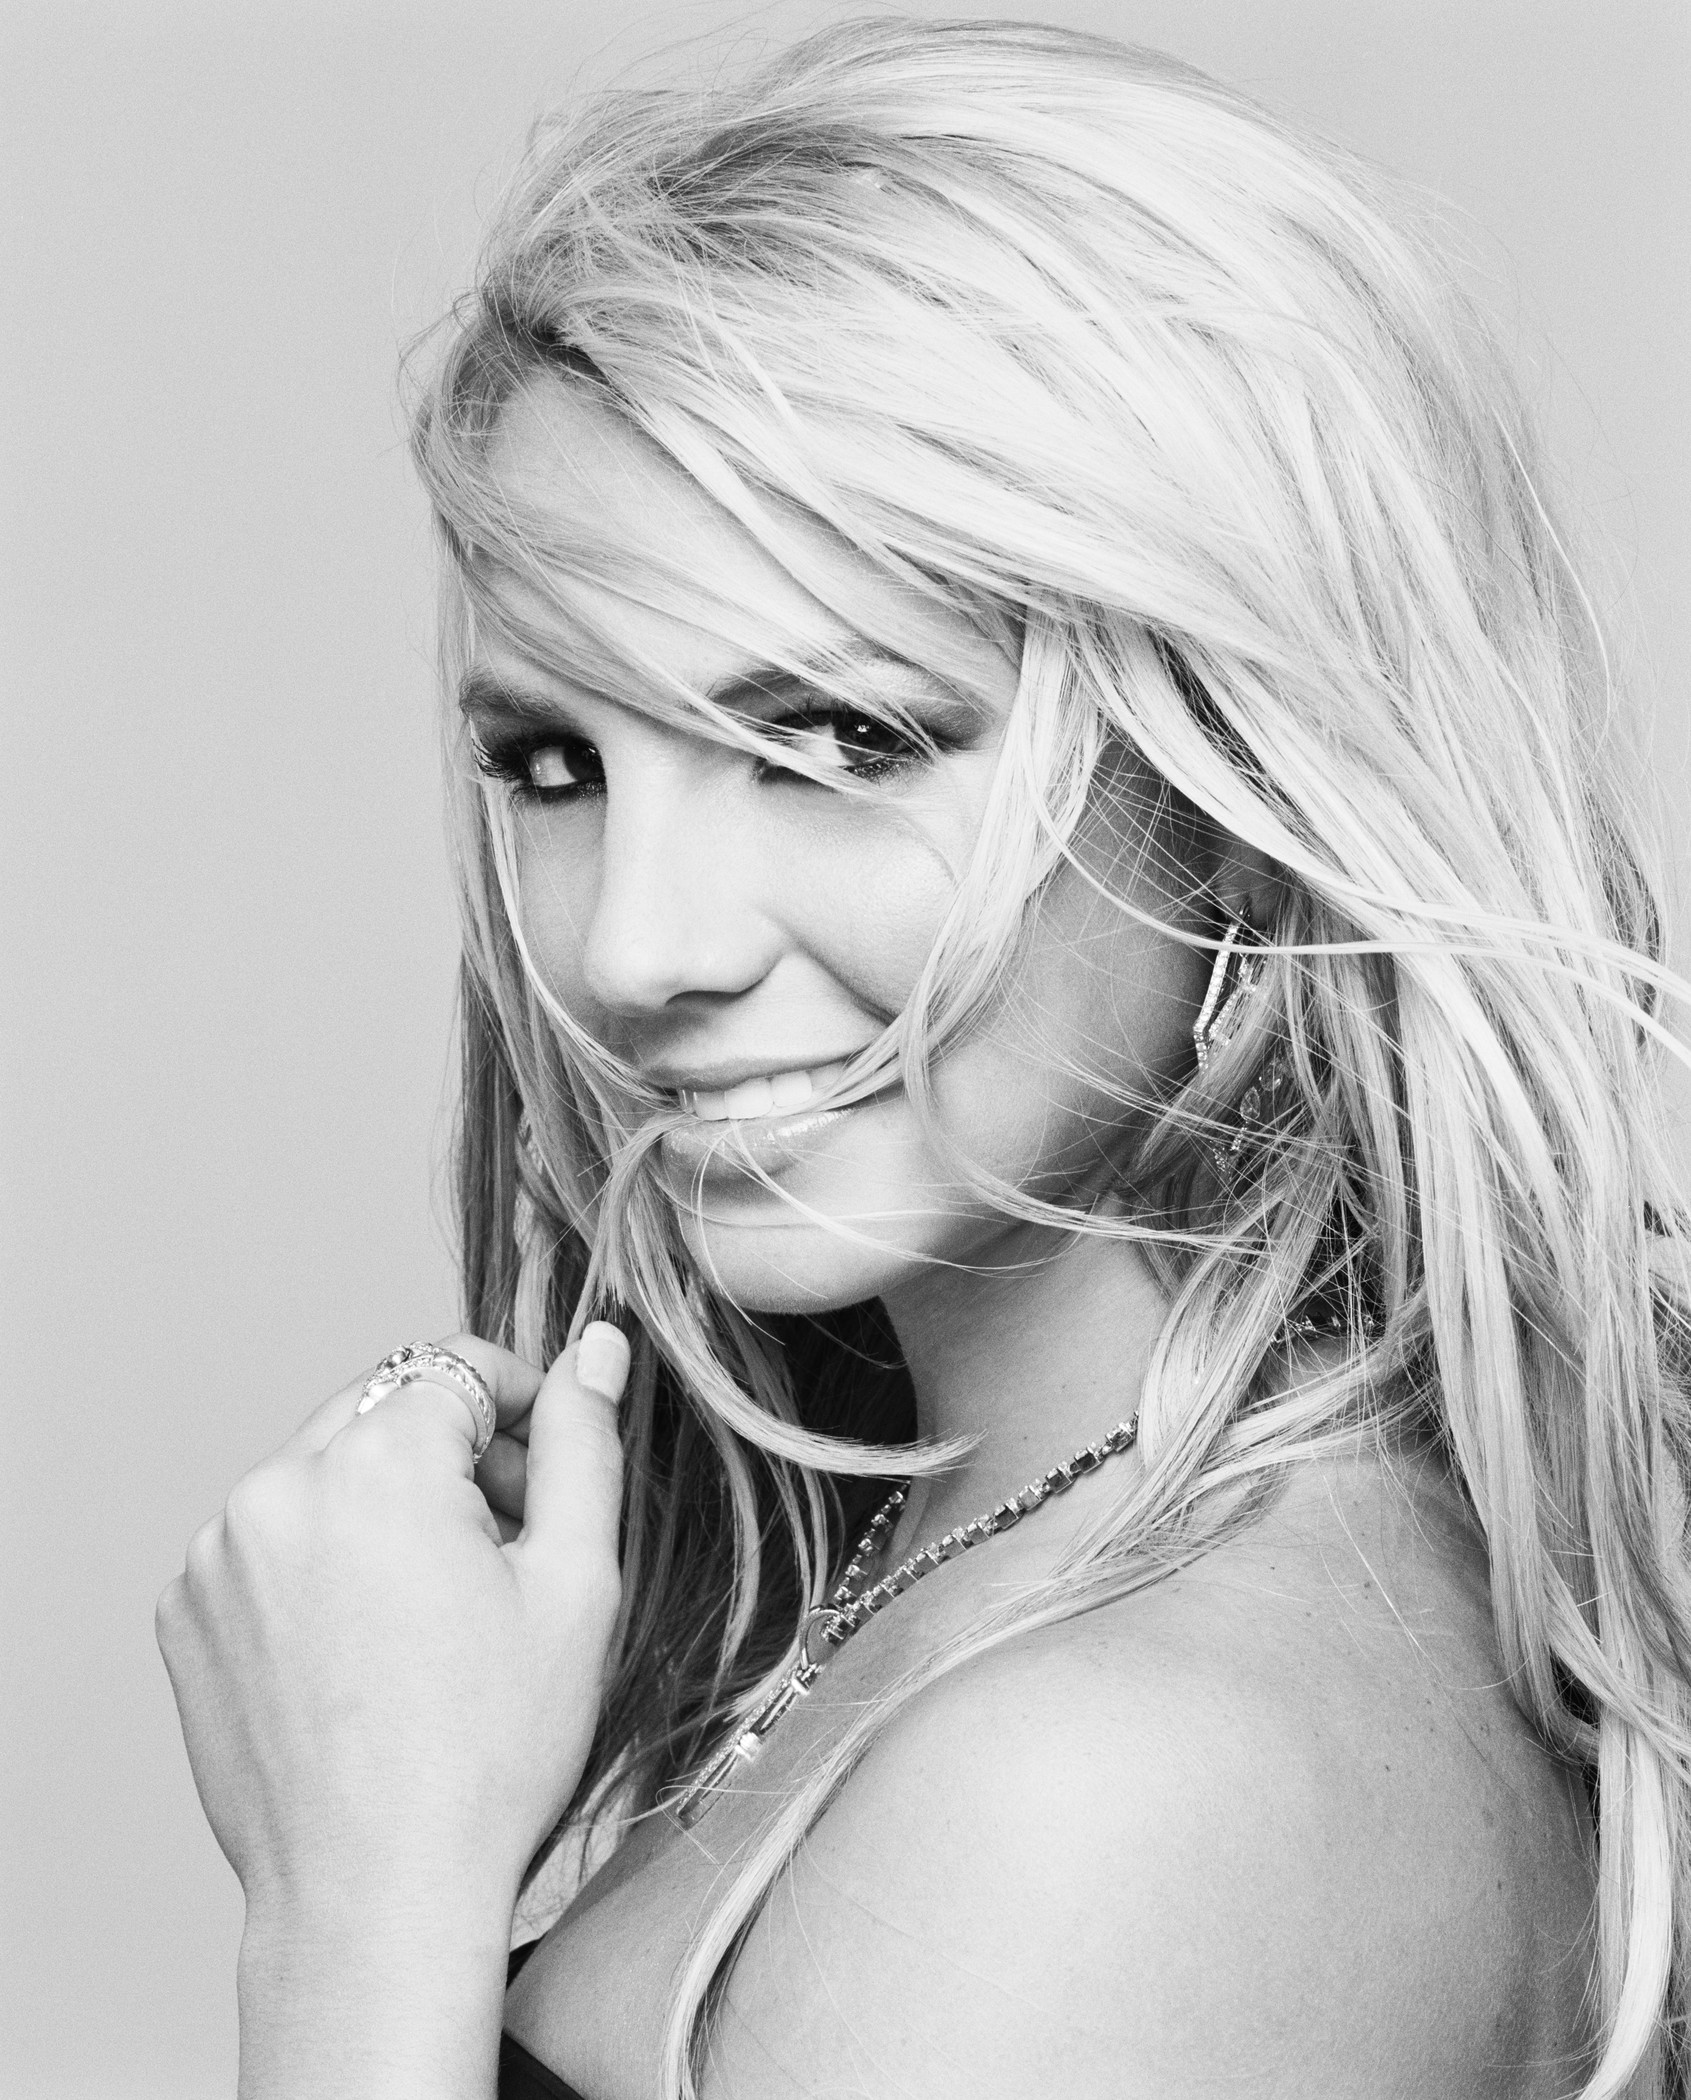 Britney Spears photo 317 of 8035 pics, wallpaper - photo #78431 - ThePlace2